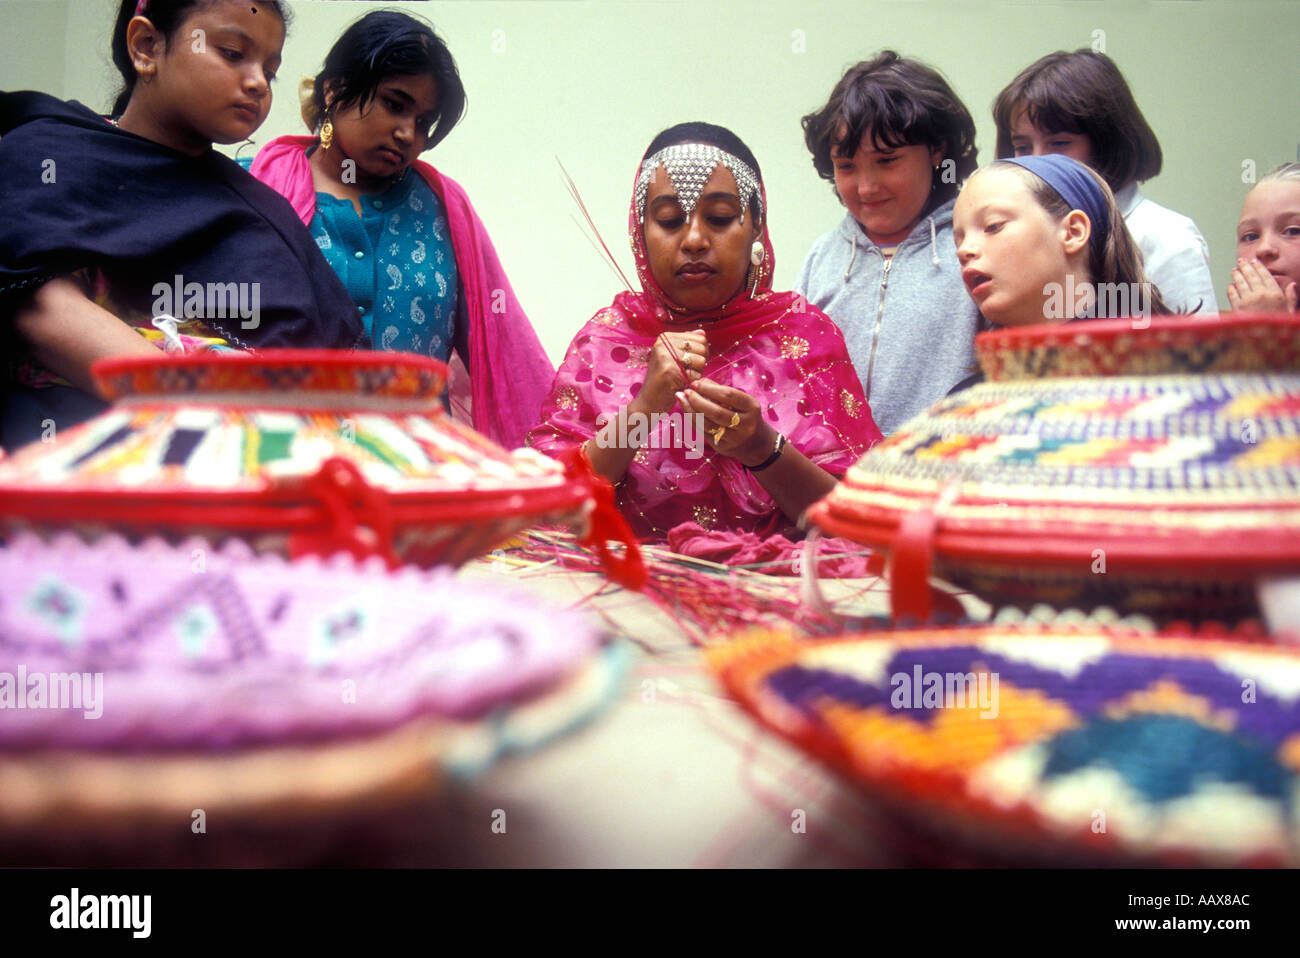 A demonstration of traditional basket weaving by an Asian woman in a primary school in London. Stock Photo